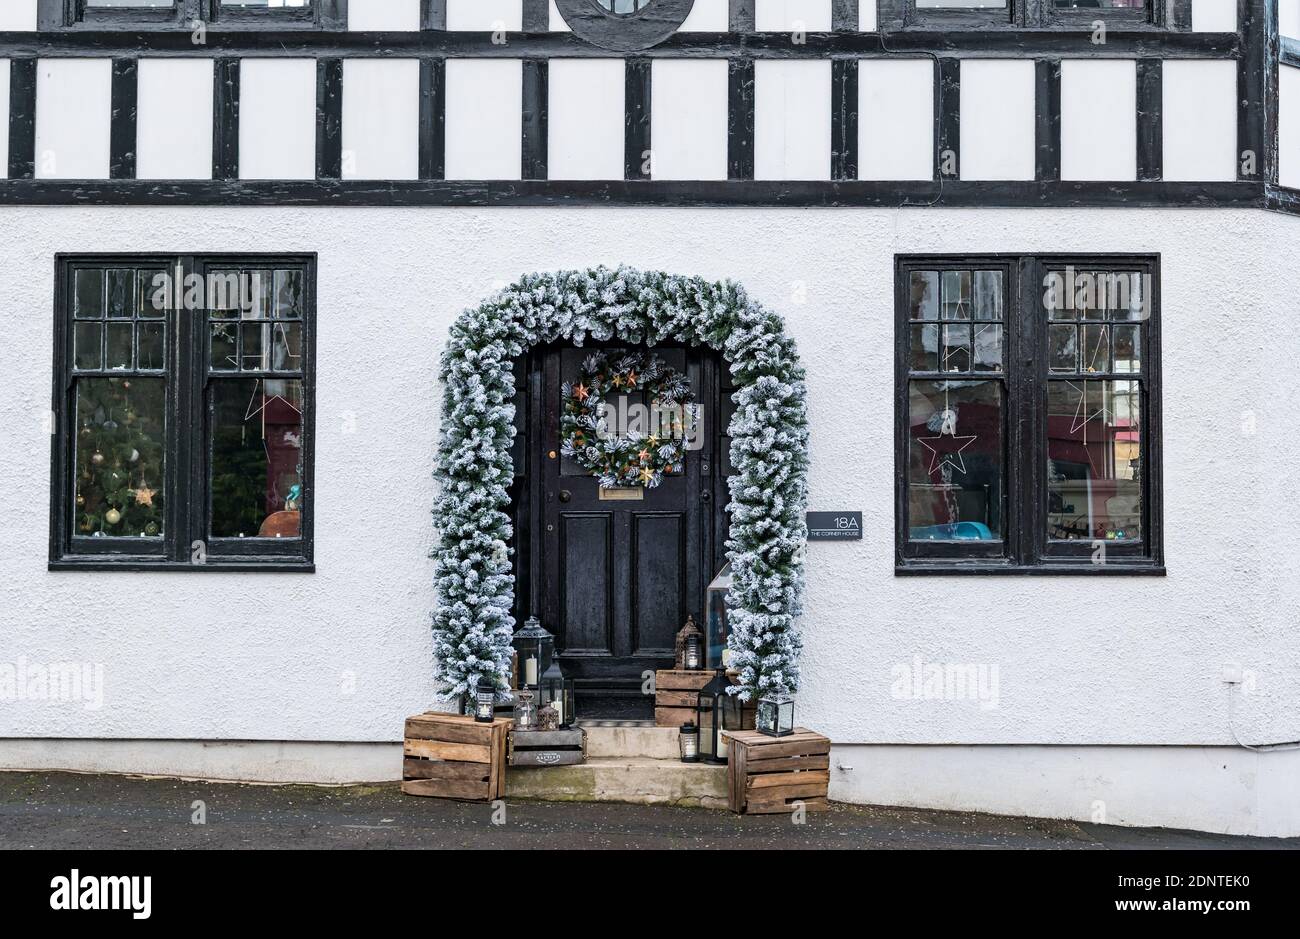 Aberlady, East Lothian, Scotland, United Kingdom, 18th December 2020. Christmas decorations: an unusual timber framed house in the village is richly decorated for the festive season with a garland around the door and a Christmas wreath Stock Photo